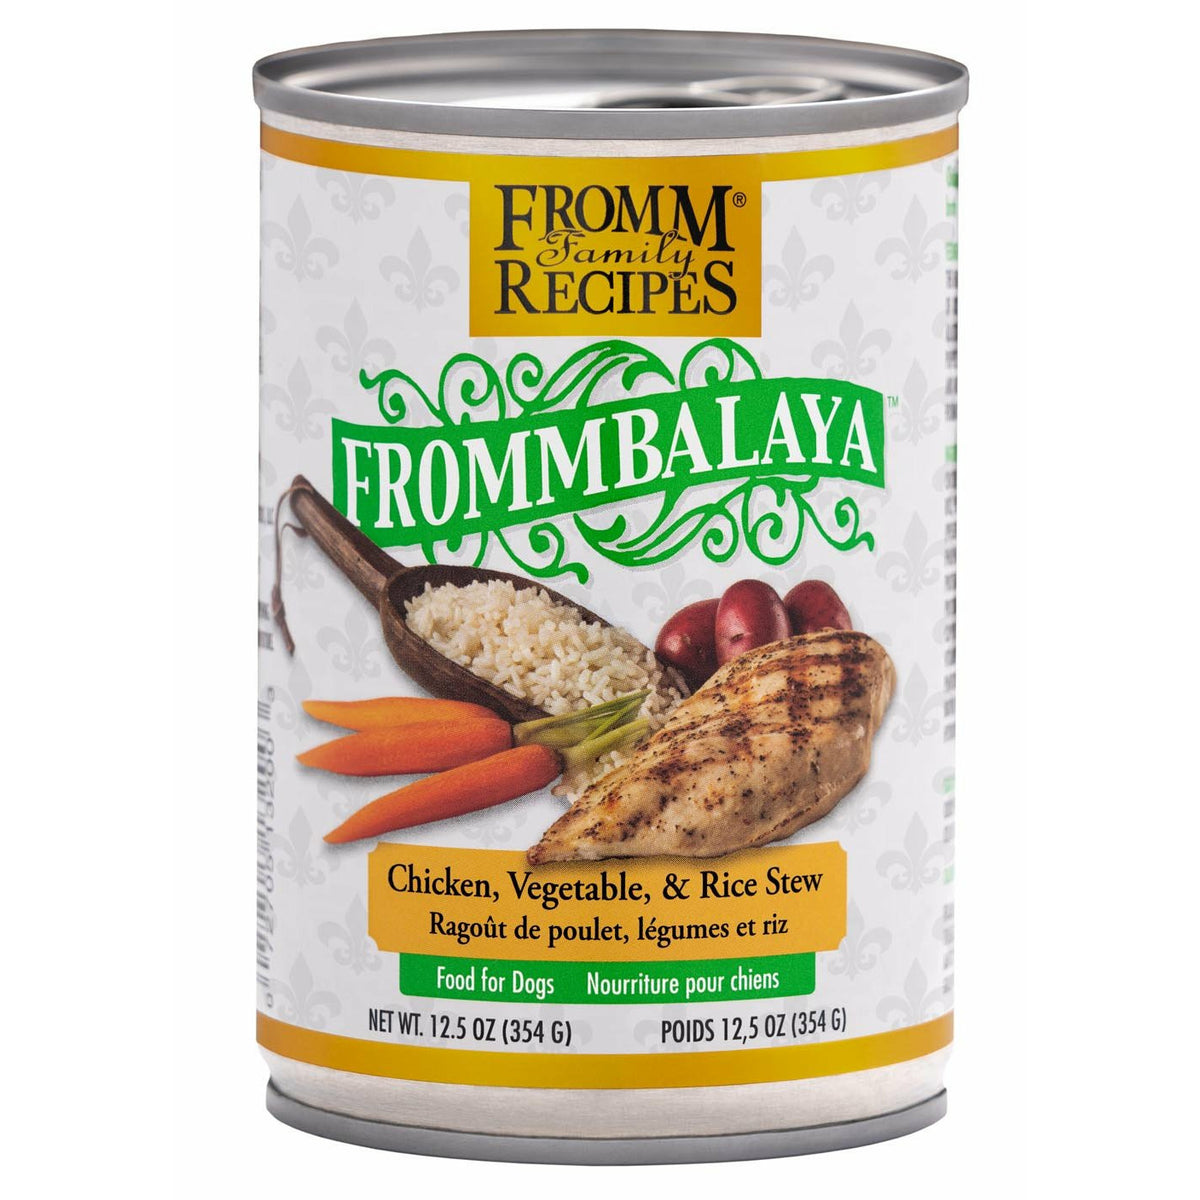 Fromm Family Recipes - Frommbalaya Chicken, Vegetable, &amp; Rice Stew - Canned Dog Food (354g)